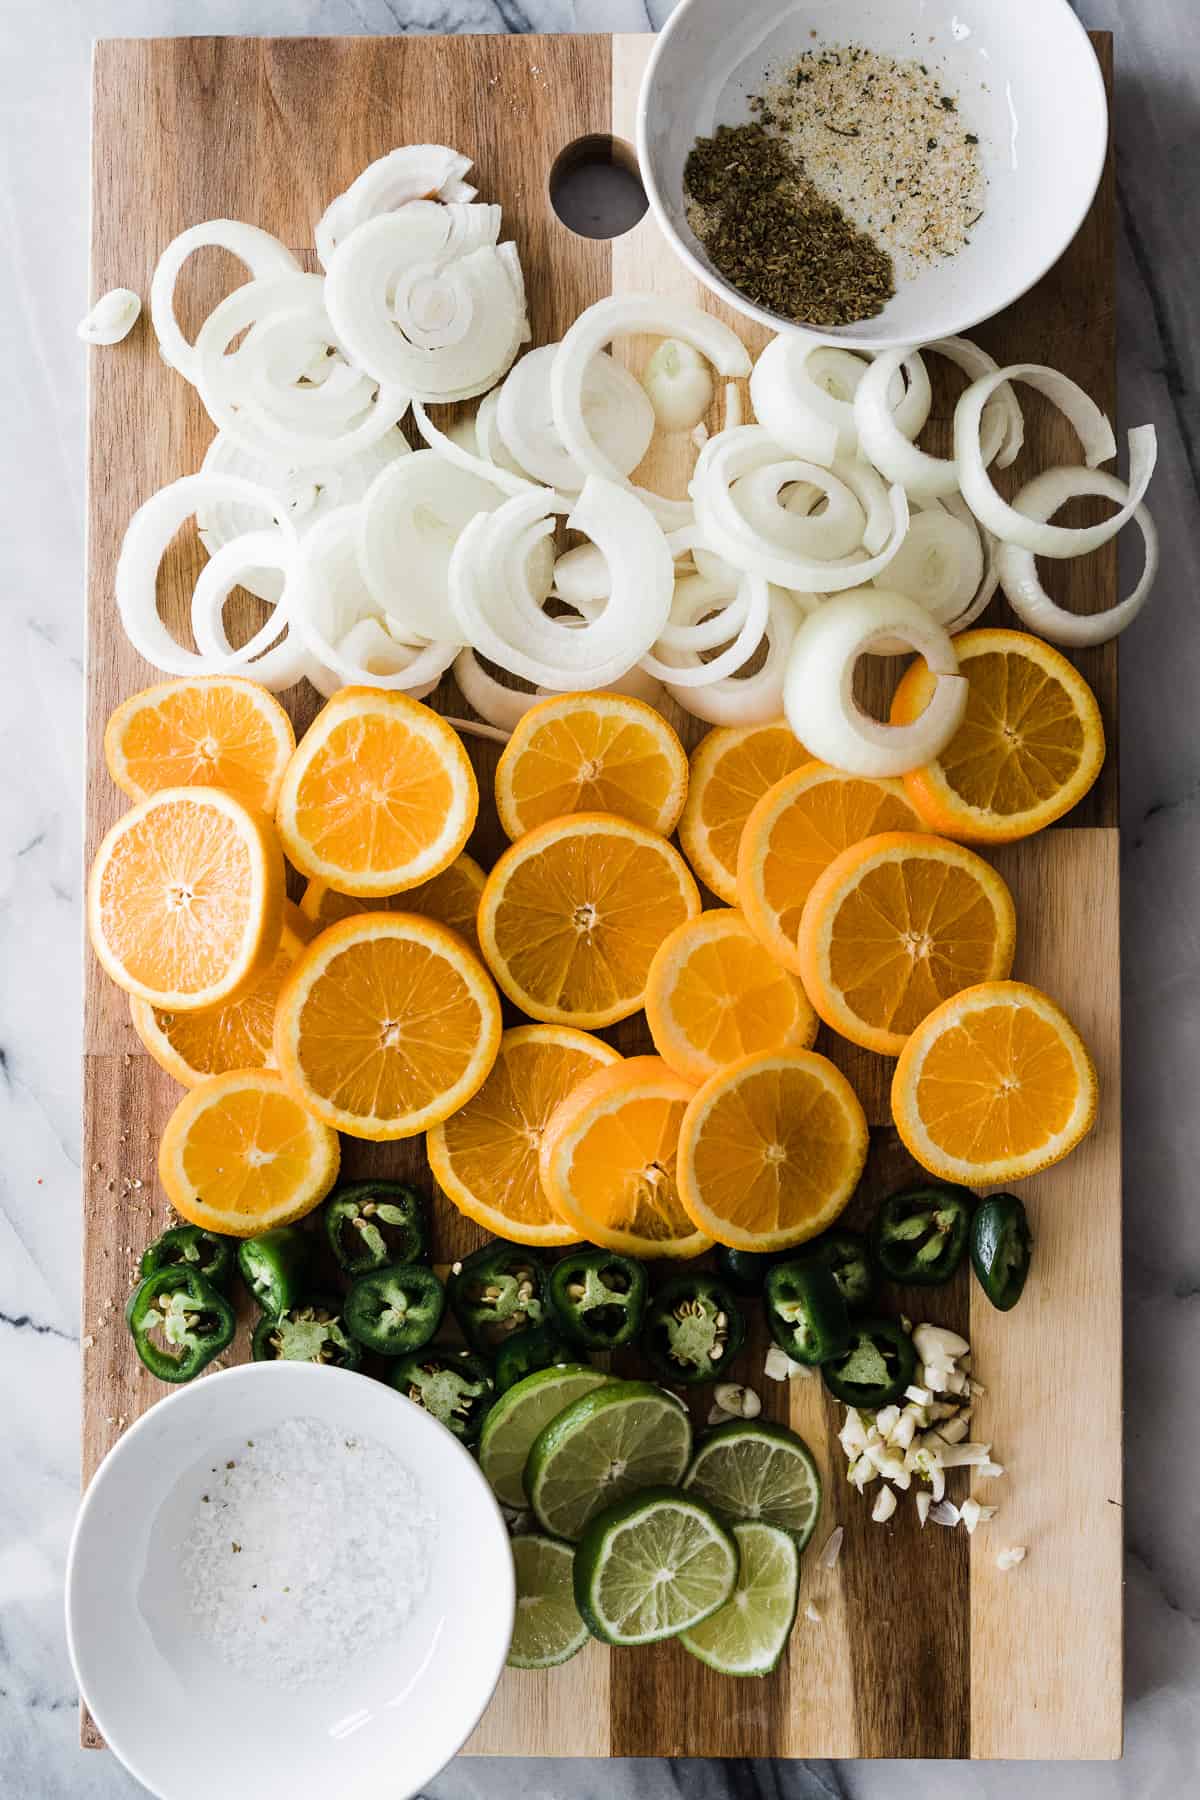 onion, oranges, jalapeno, limes on cutting board